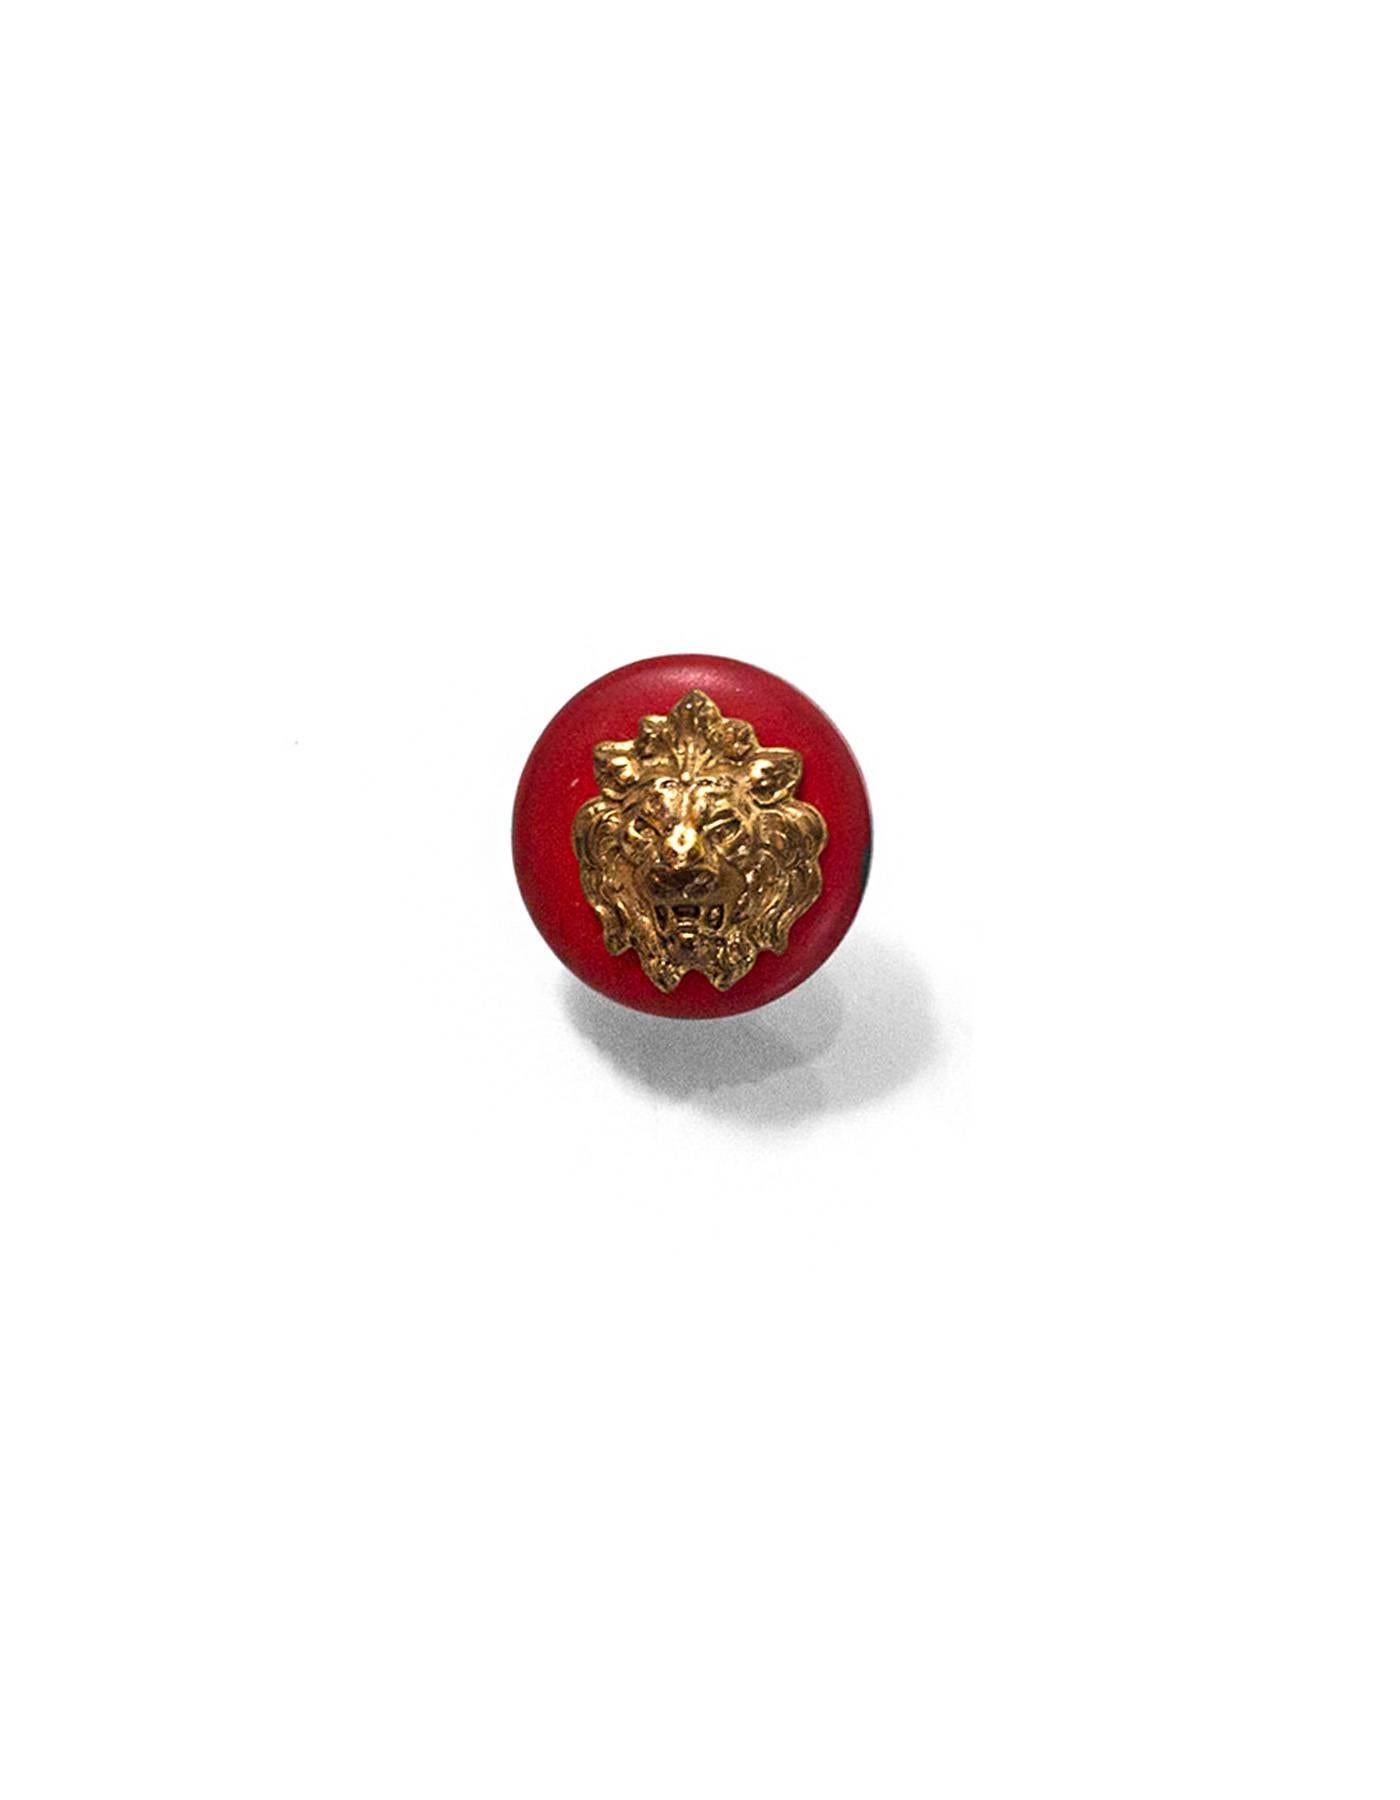 Chanel Red & Goldtone Lion-Head Buttons

Features set of six 12mm buttons

Color: Red, gold
Hardware: Goldtone
Materials: Resin, metal
Stamp: None
Overall Condition: Excellent good pre-owned condition, some soiling throughout surface

Measurements: